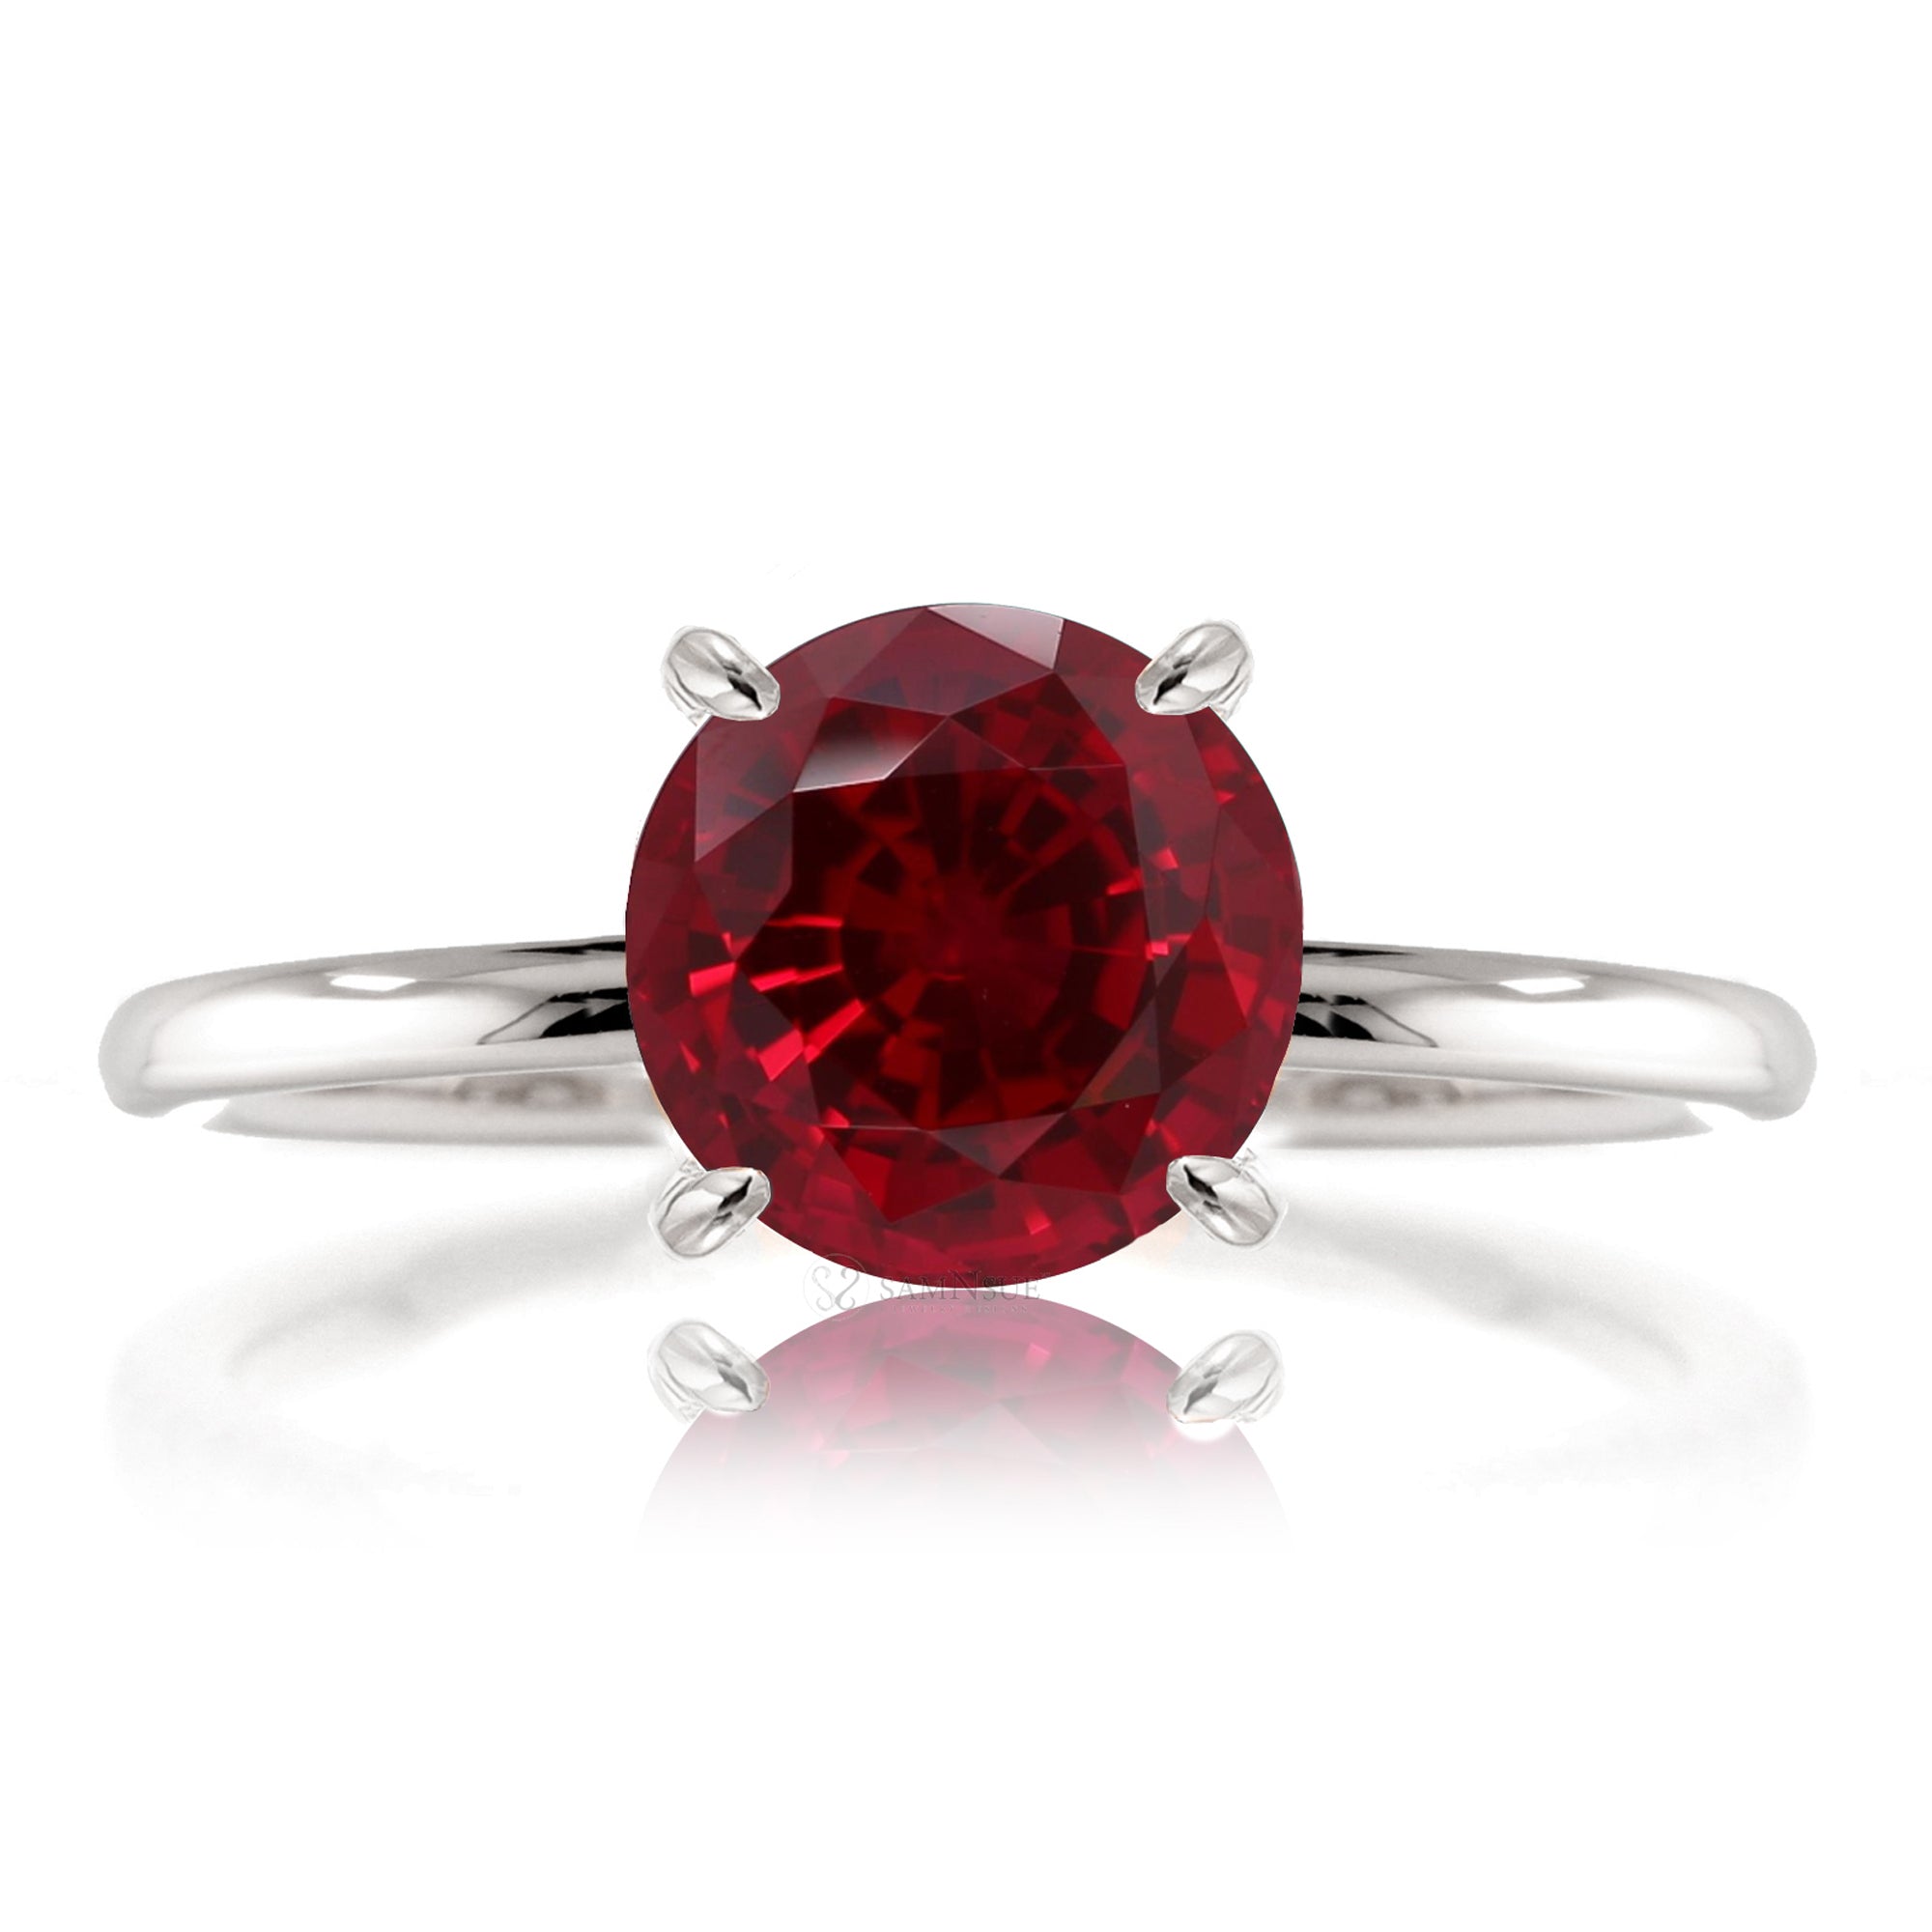 Round cut lab ruby engagement ring solid band white gold - the Ava